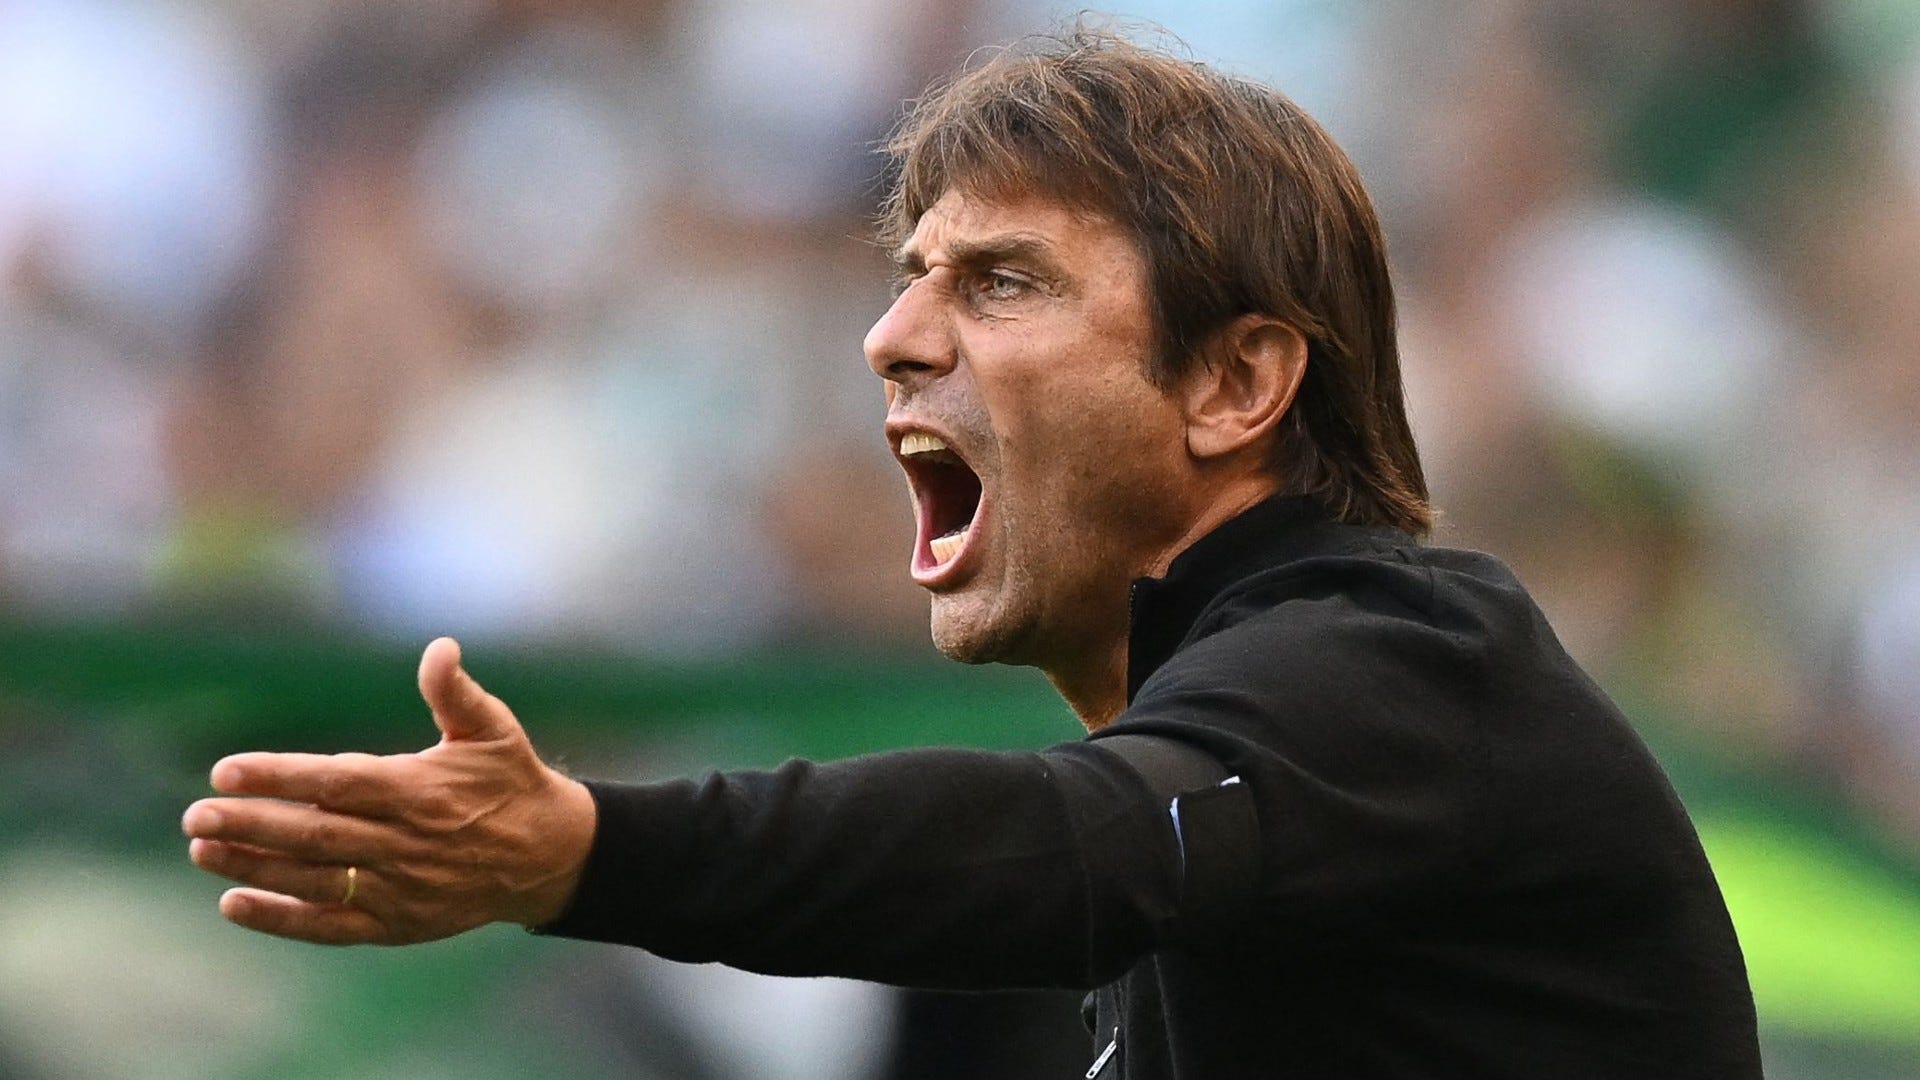 Conte angered by 'disrespectful' Juventus return rumours as he hints at signing new Tottenham contract thumbnail